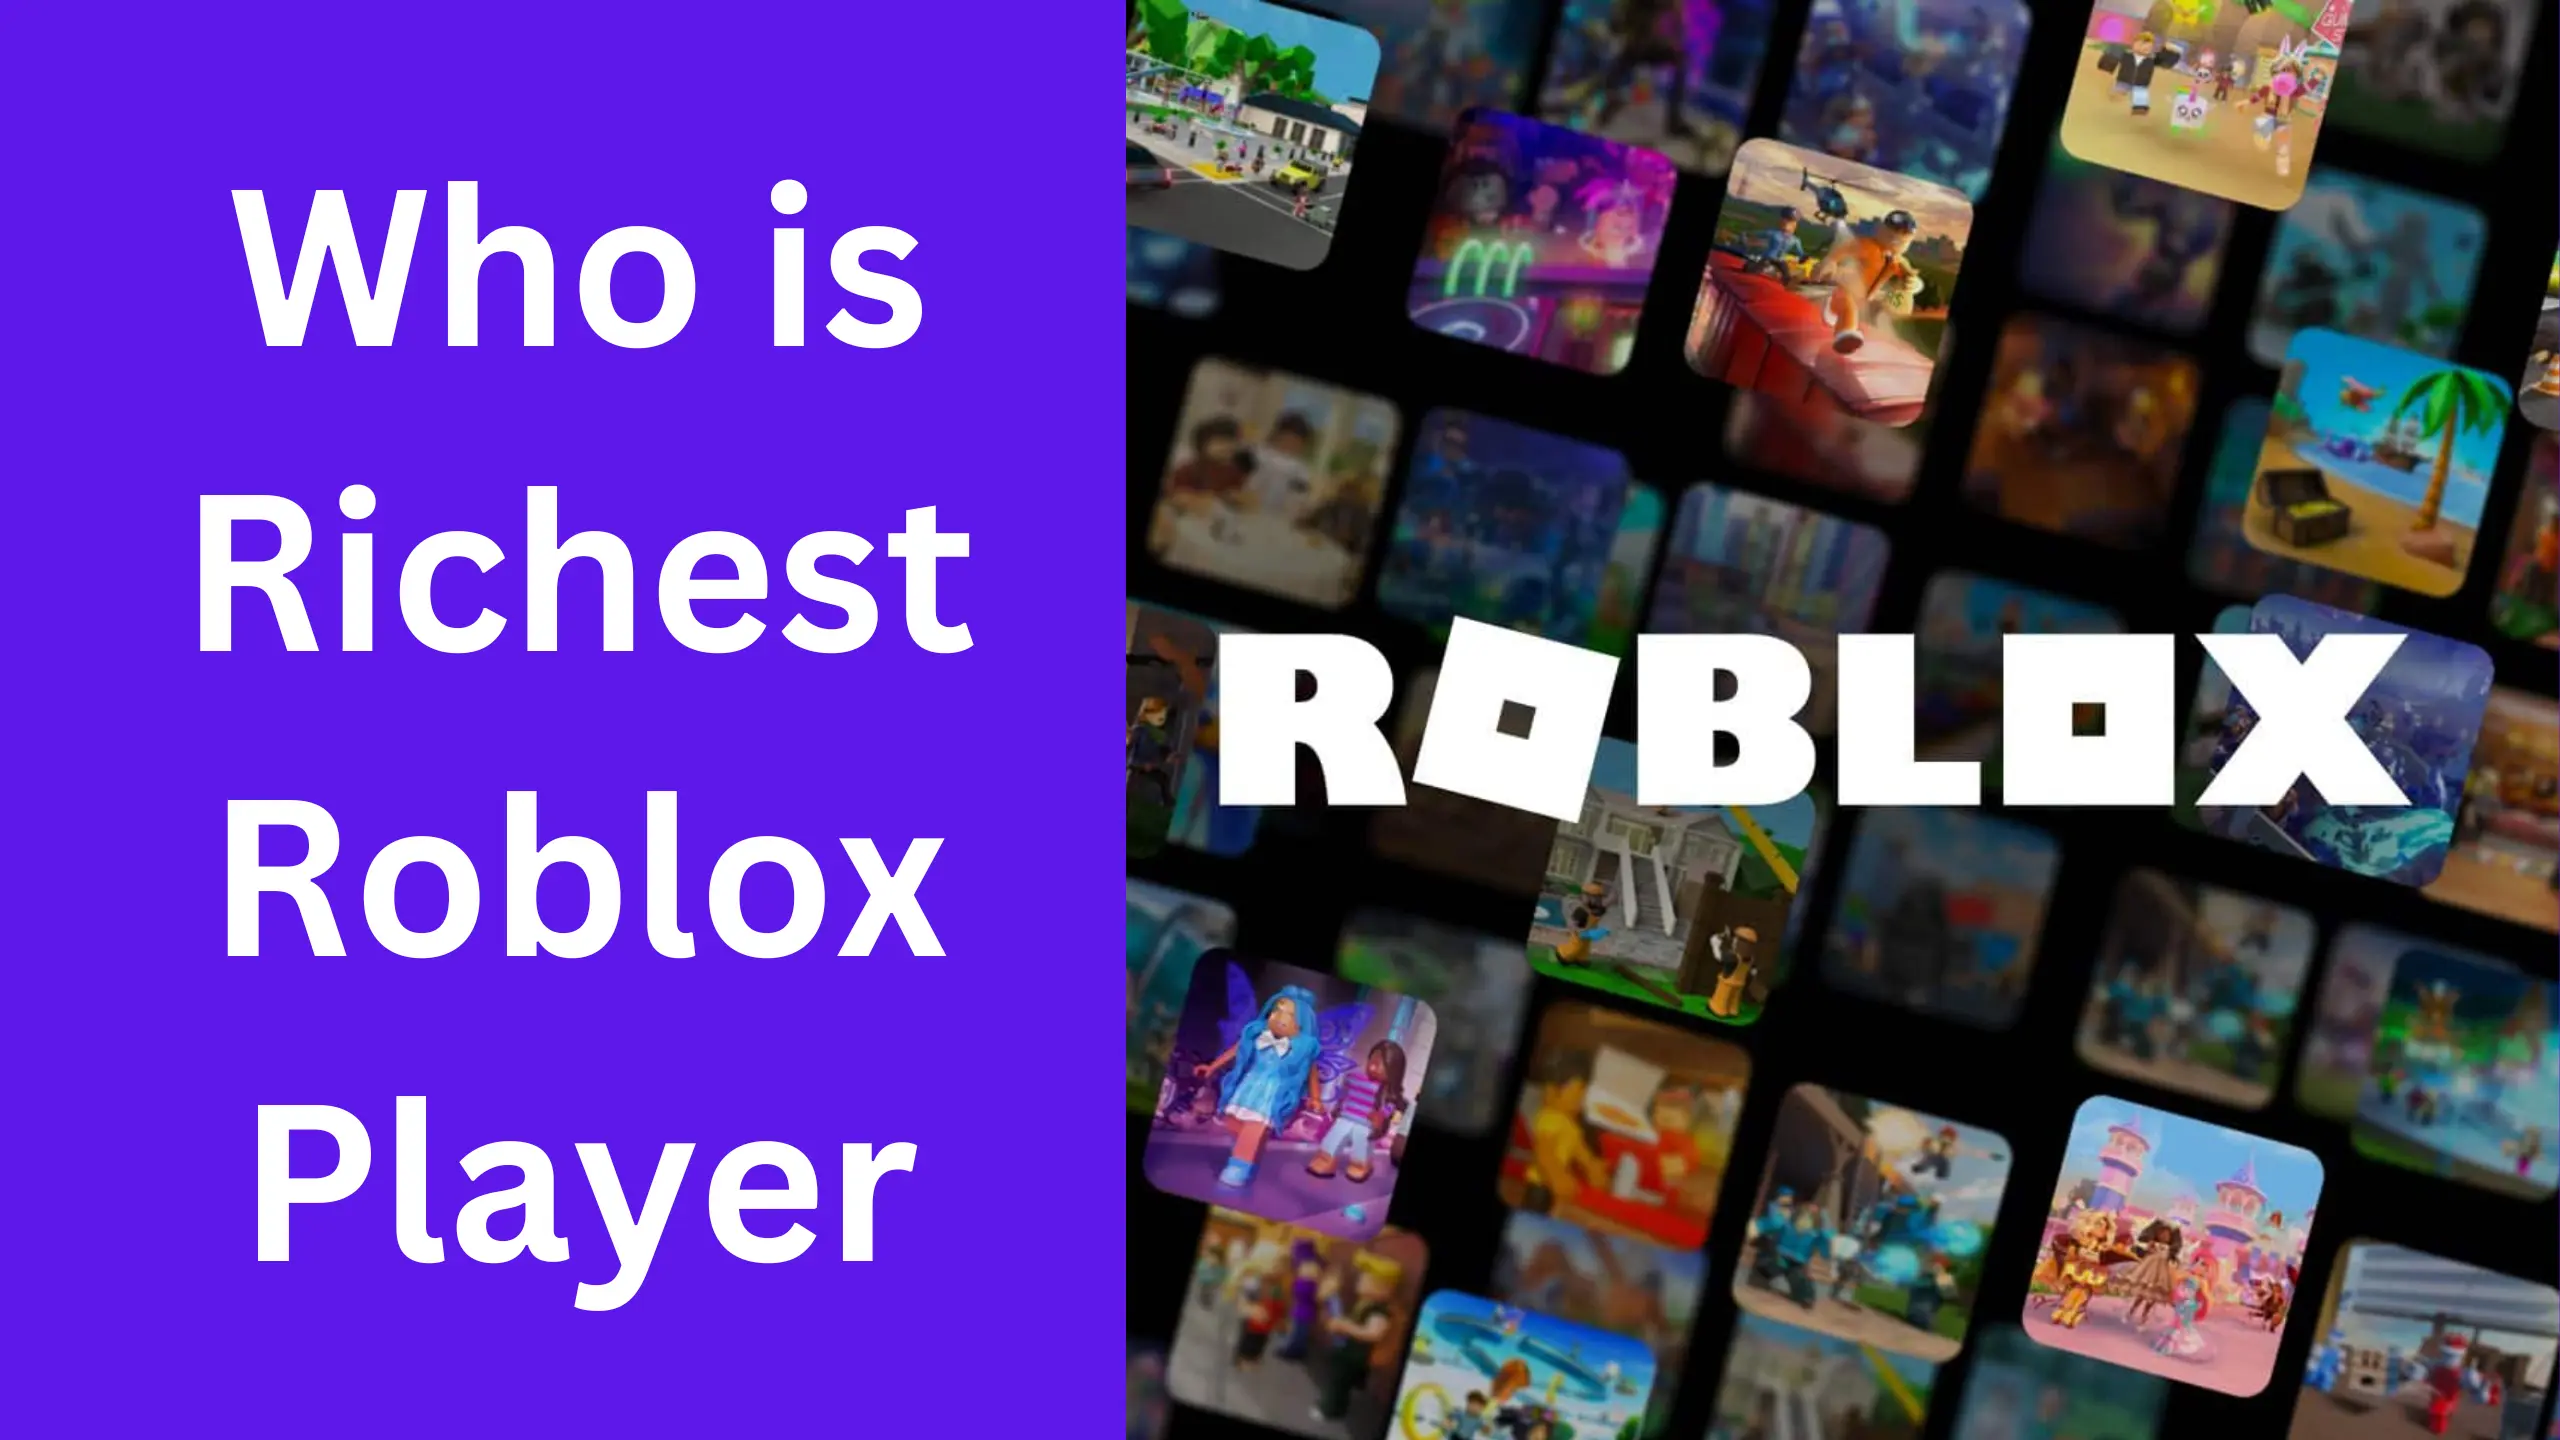 Who is Richest Roblox Player